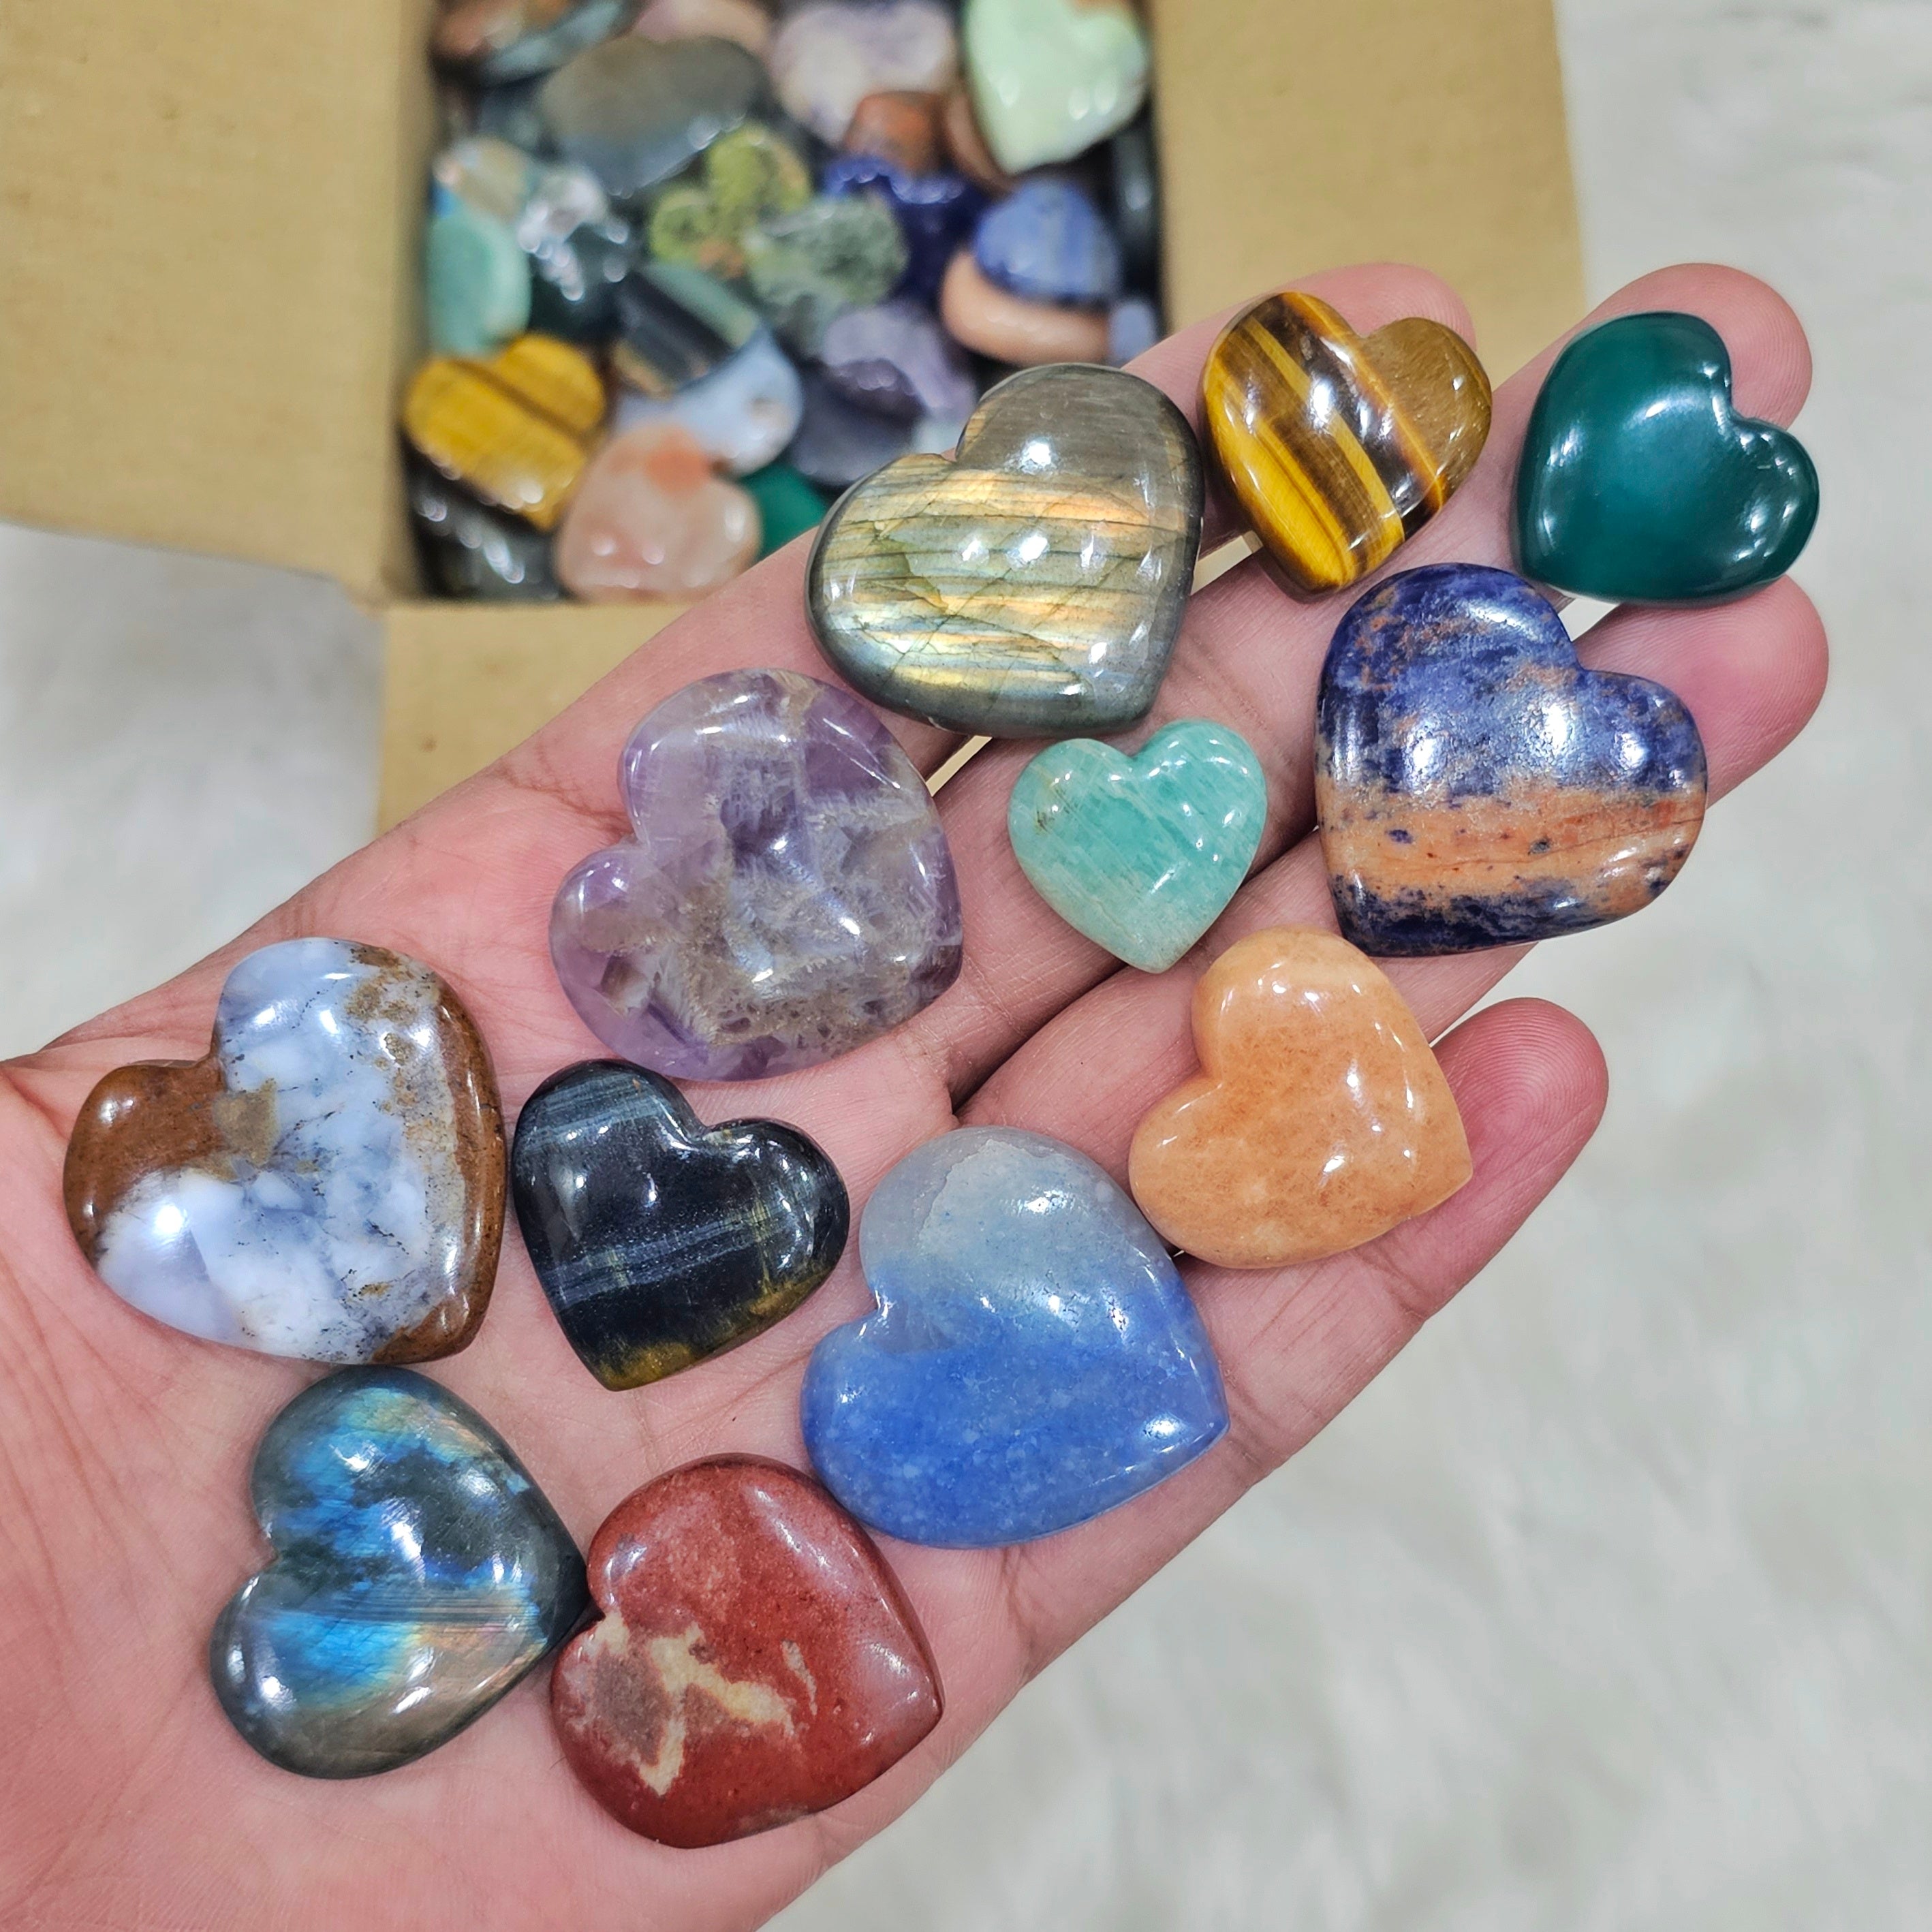 60 Pcs assortment of Crystal Hearts | 1"Inches - 2" Inches | Valentine's Day offer - The LabradoriteKing